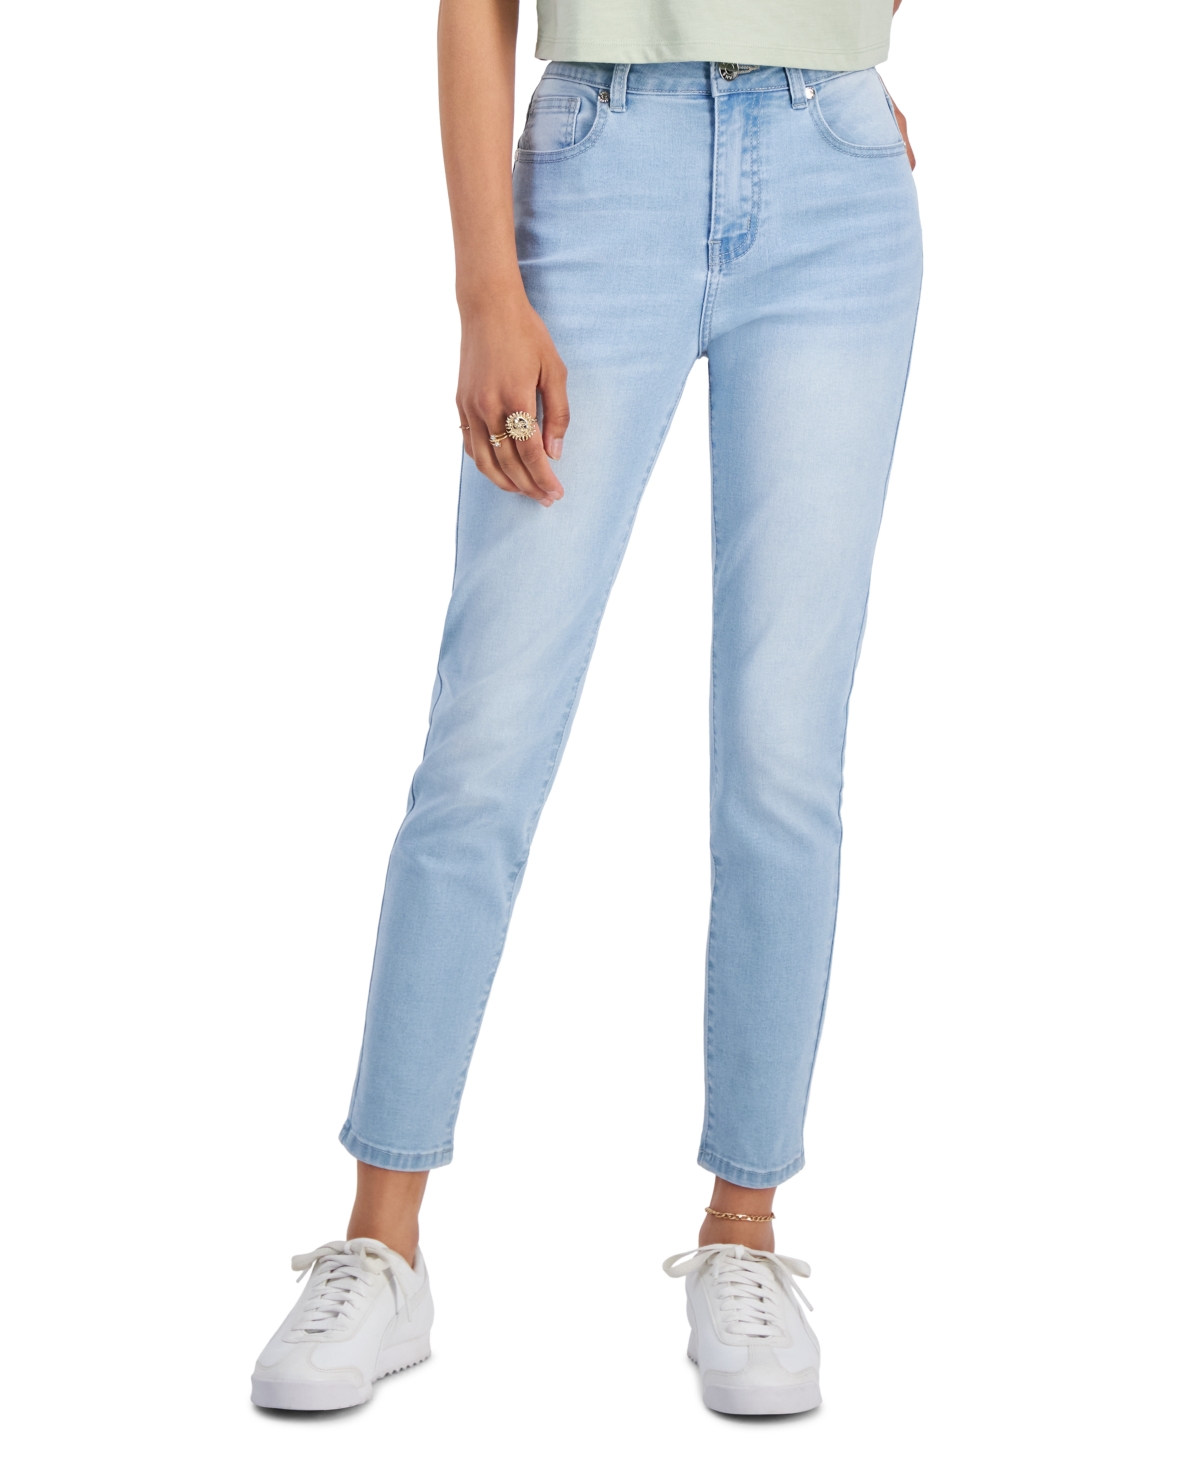 Juniors' High-Waisted Soft-Stretch Skinny Jeans - Light Wash